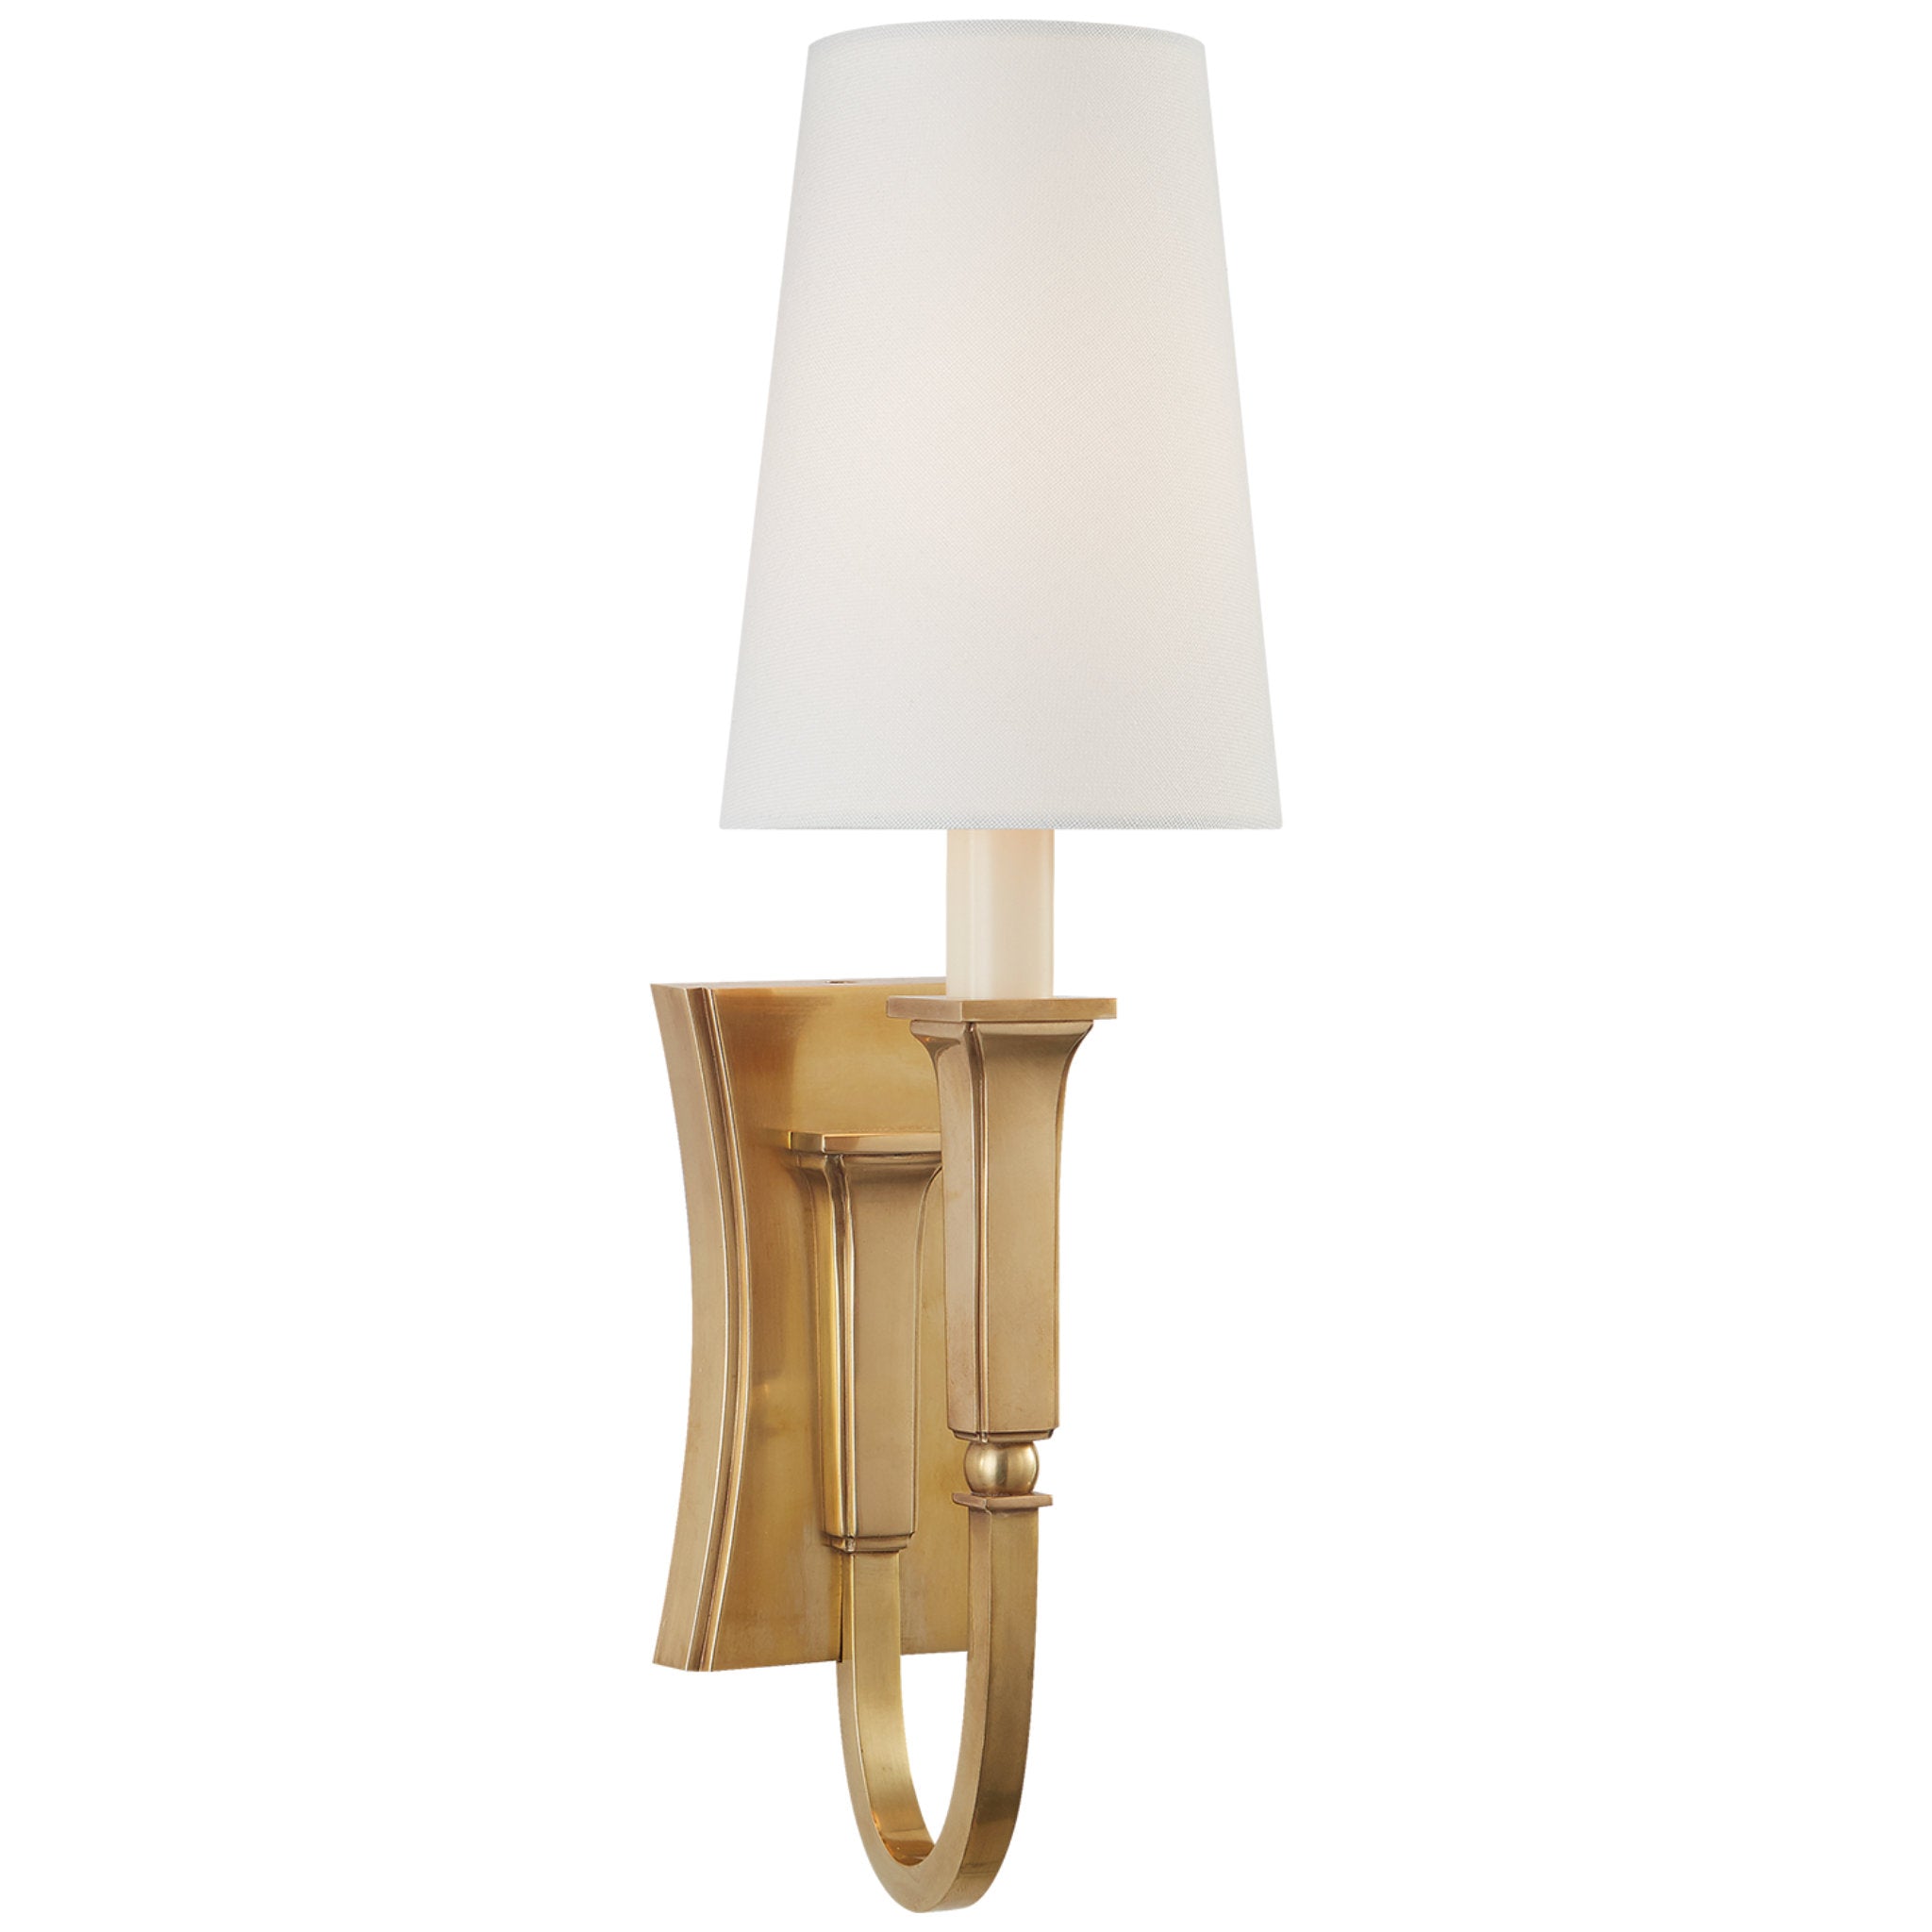 Thomas O'Brien Delphia Small Single Sconce in Hand-Rubbed Antique Brass with Linen Shade